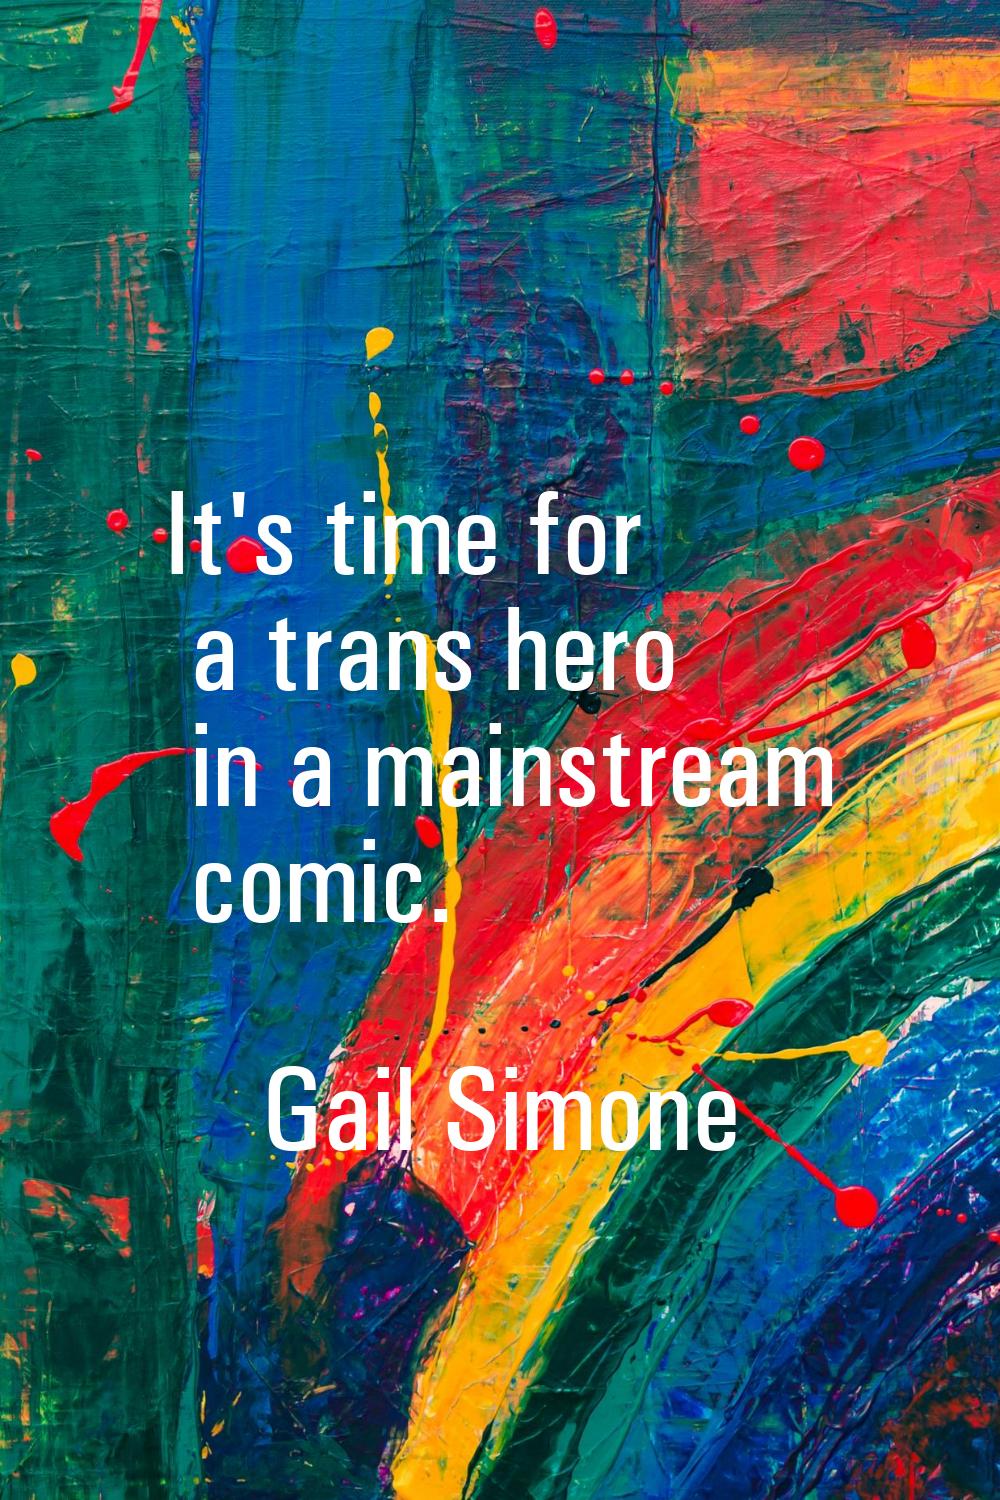 It's time for a trans hero in a mainstream comic.